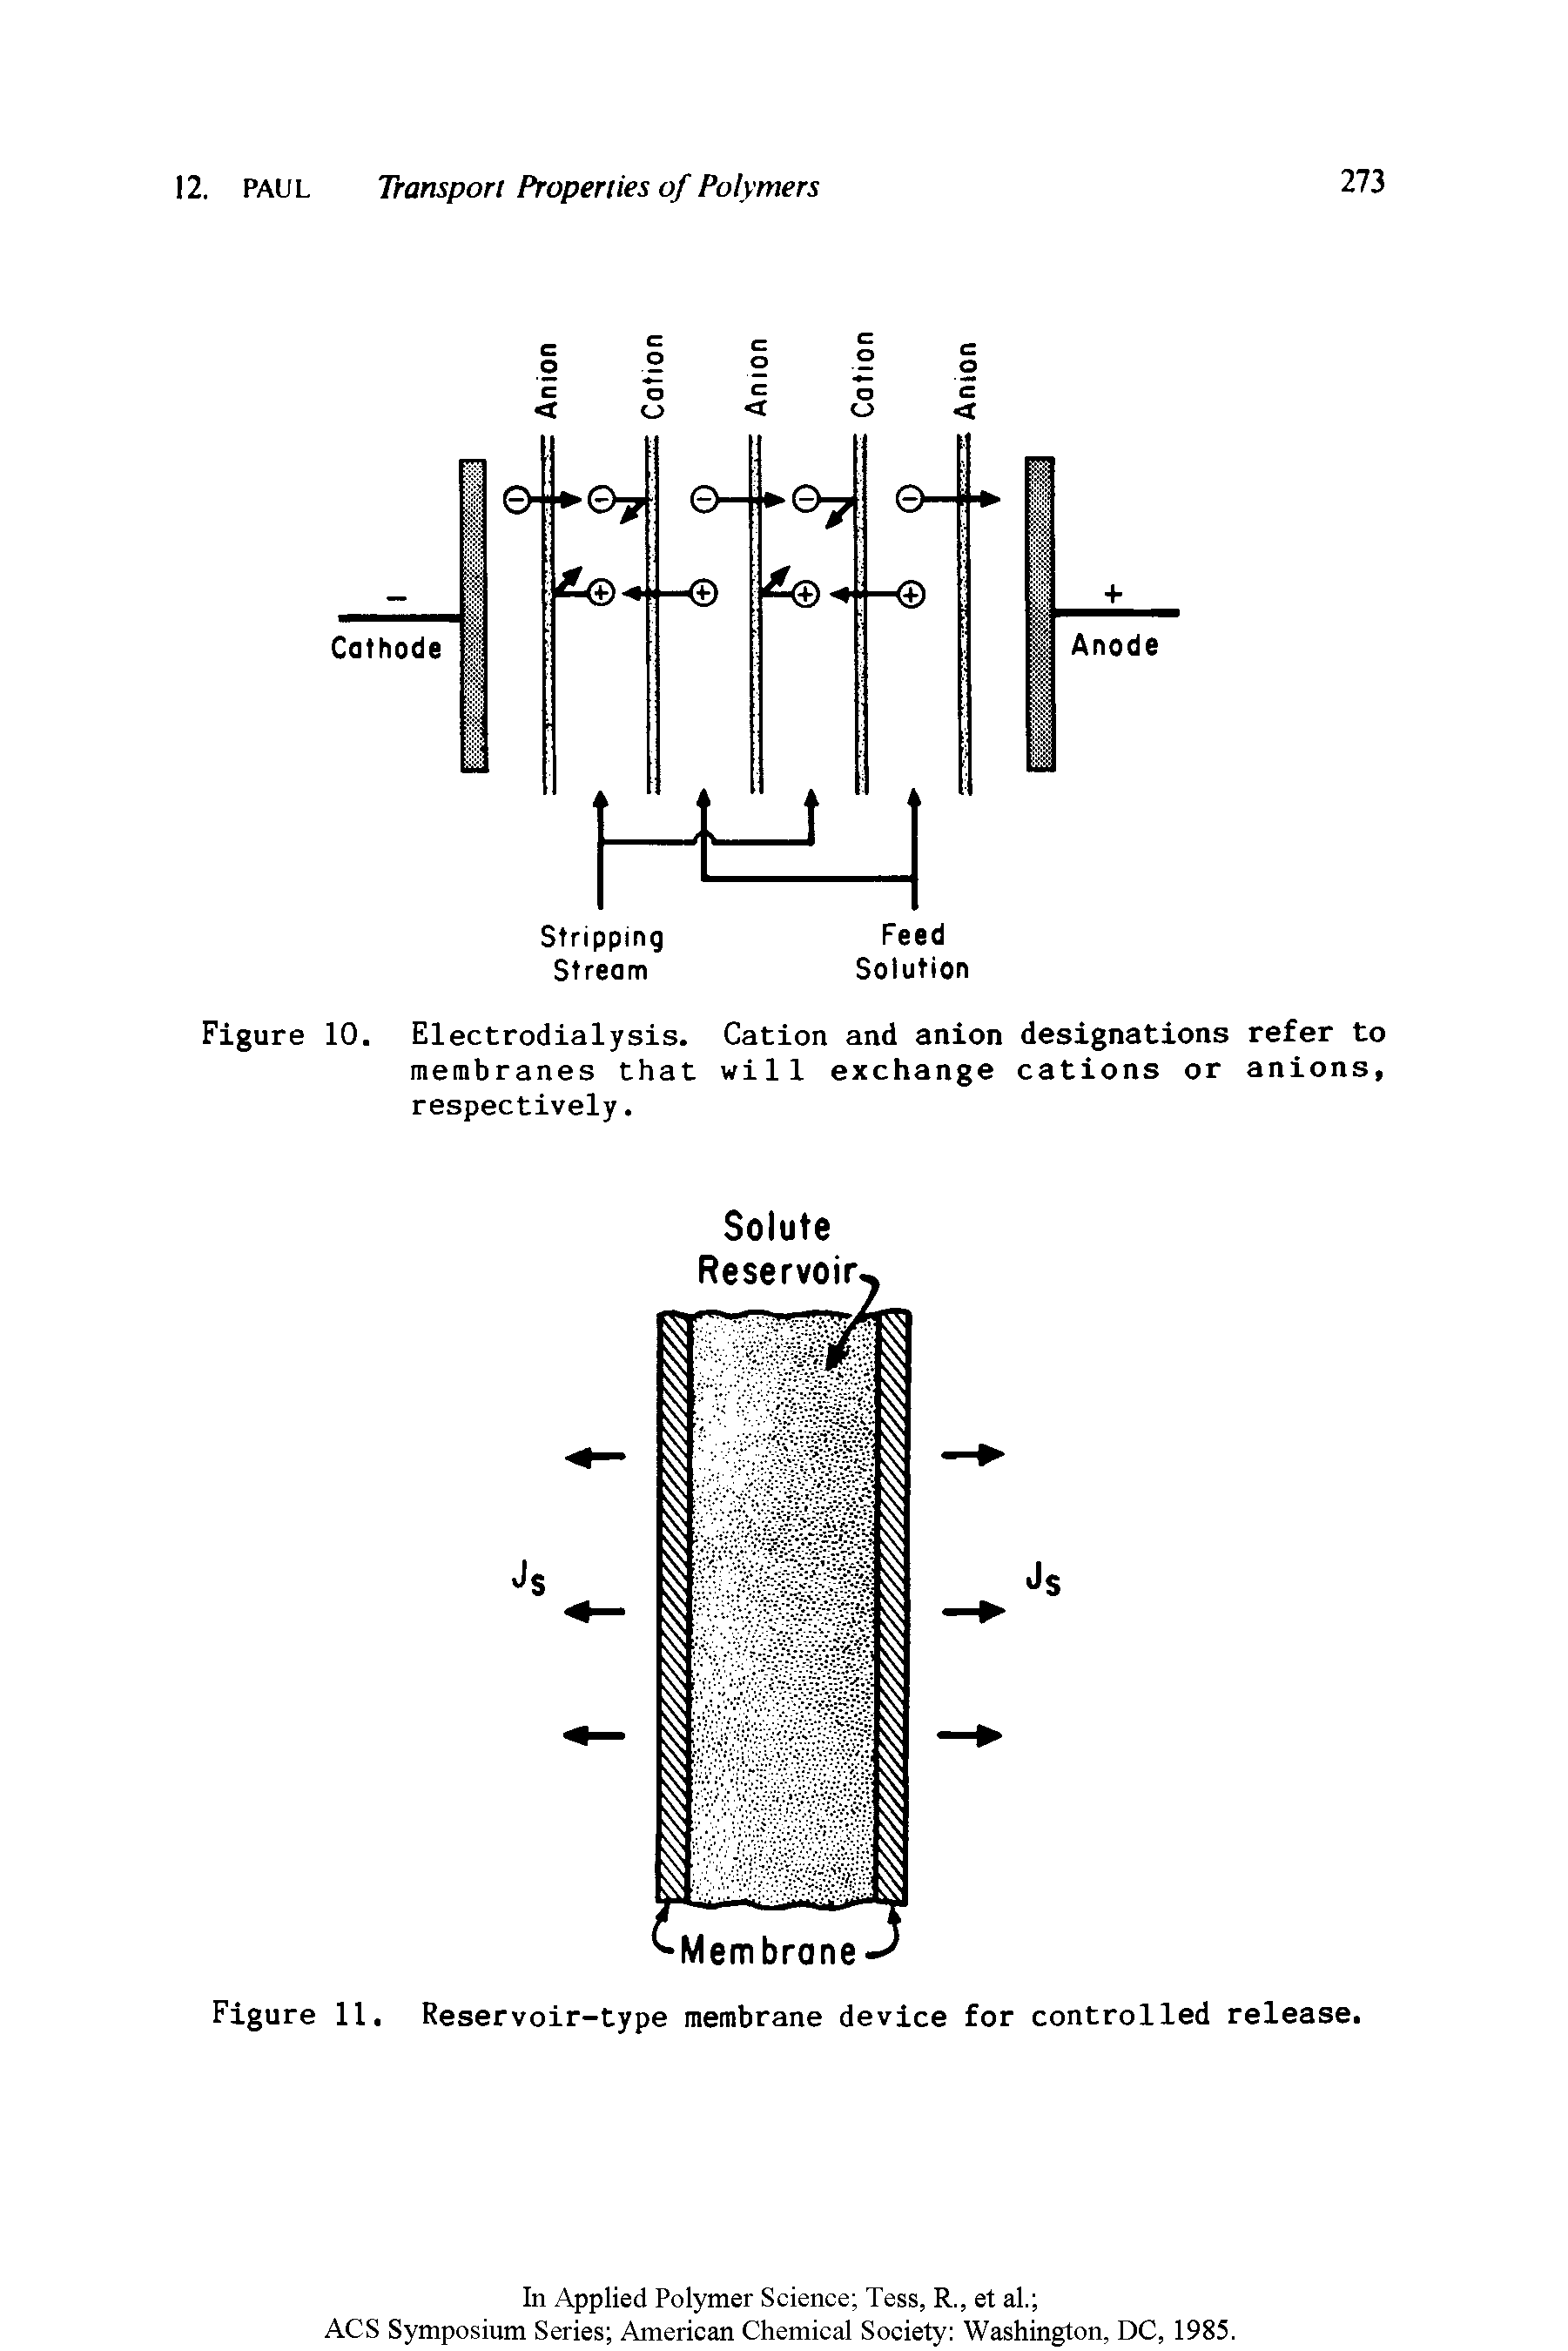 Figure 11. Reservoir-type membrane device for controlled release.